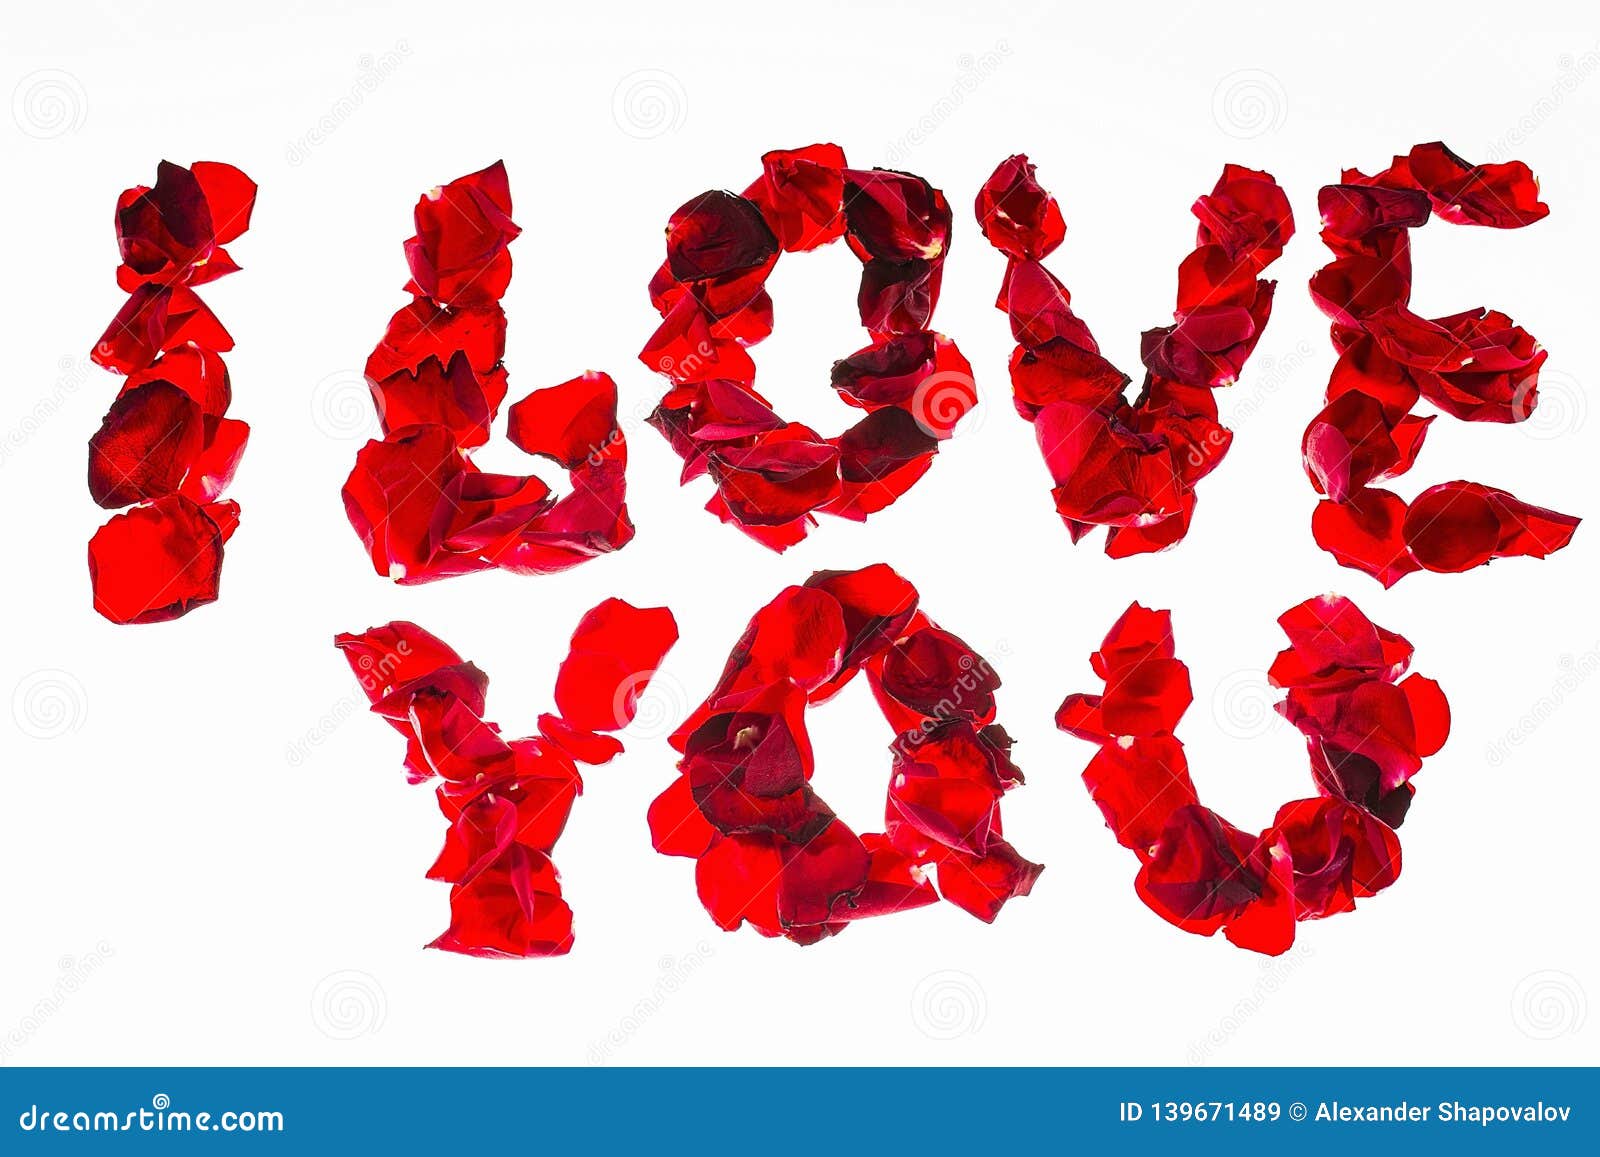 I Love You - Words Made of Red Rose Petals. Beautiful Romantic ...